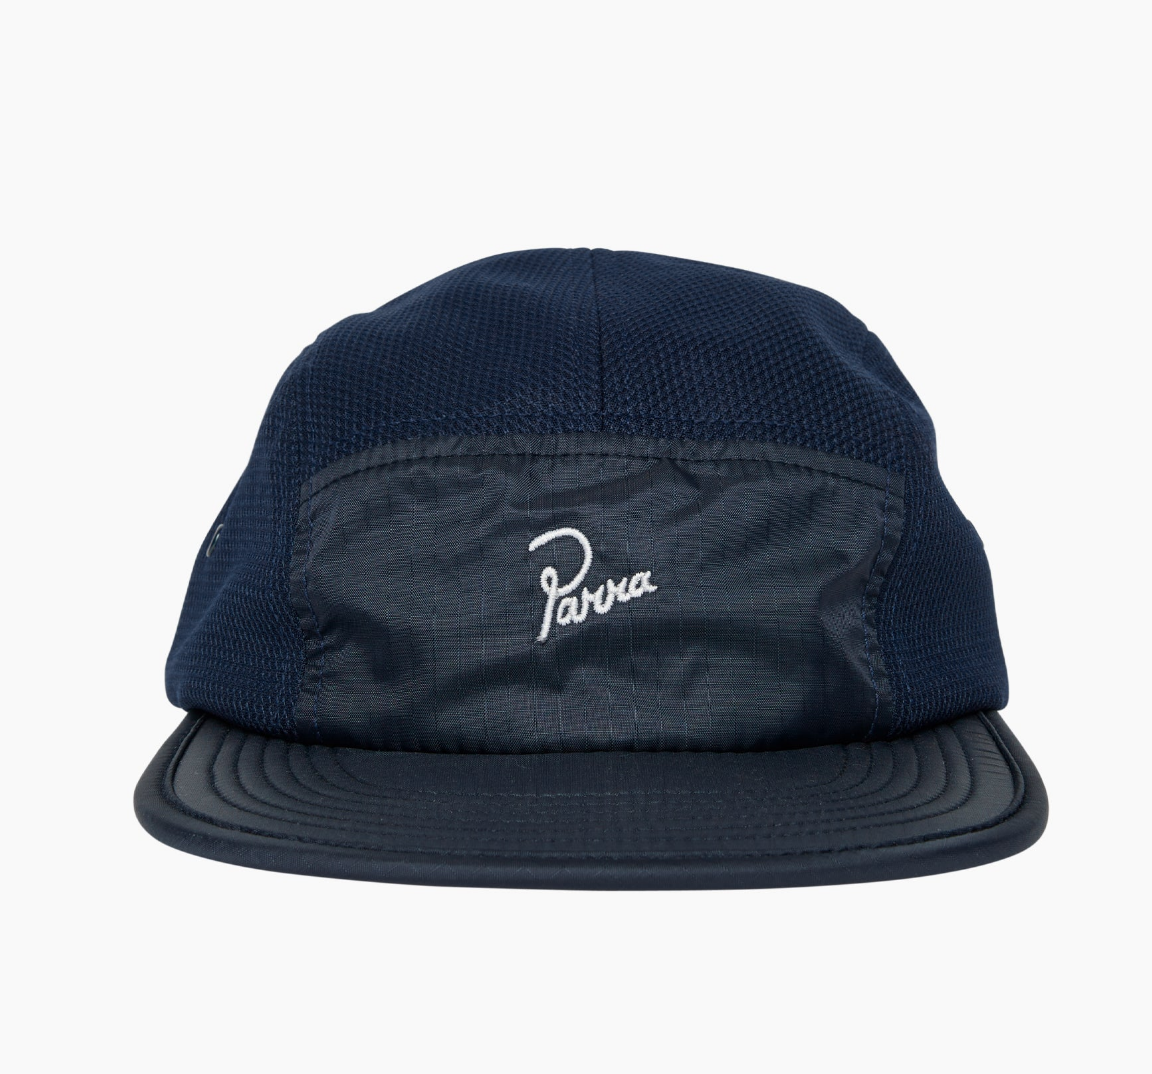 BY PARRA Classic Volley Hat LEO BOUTIQUE